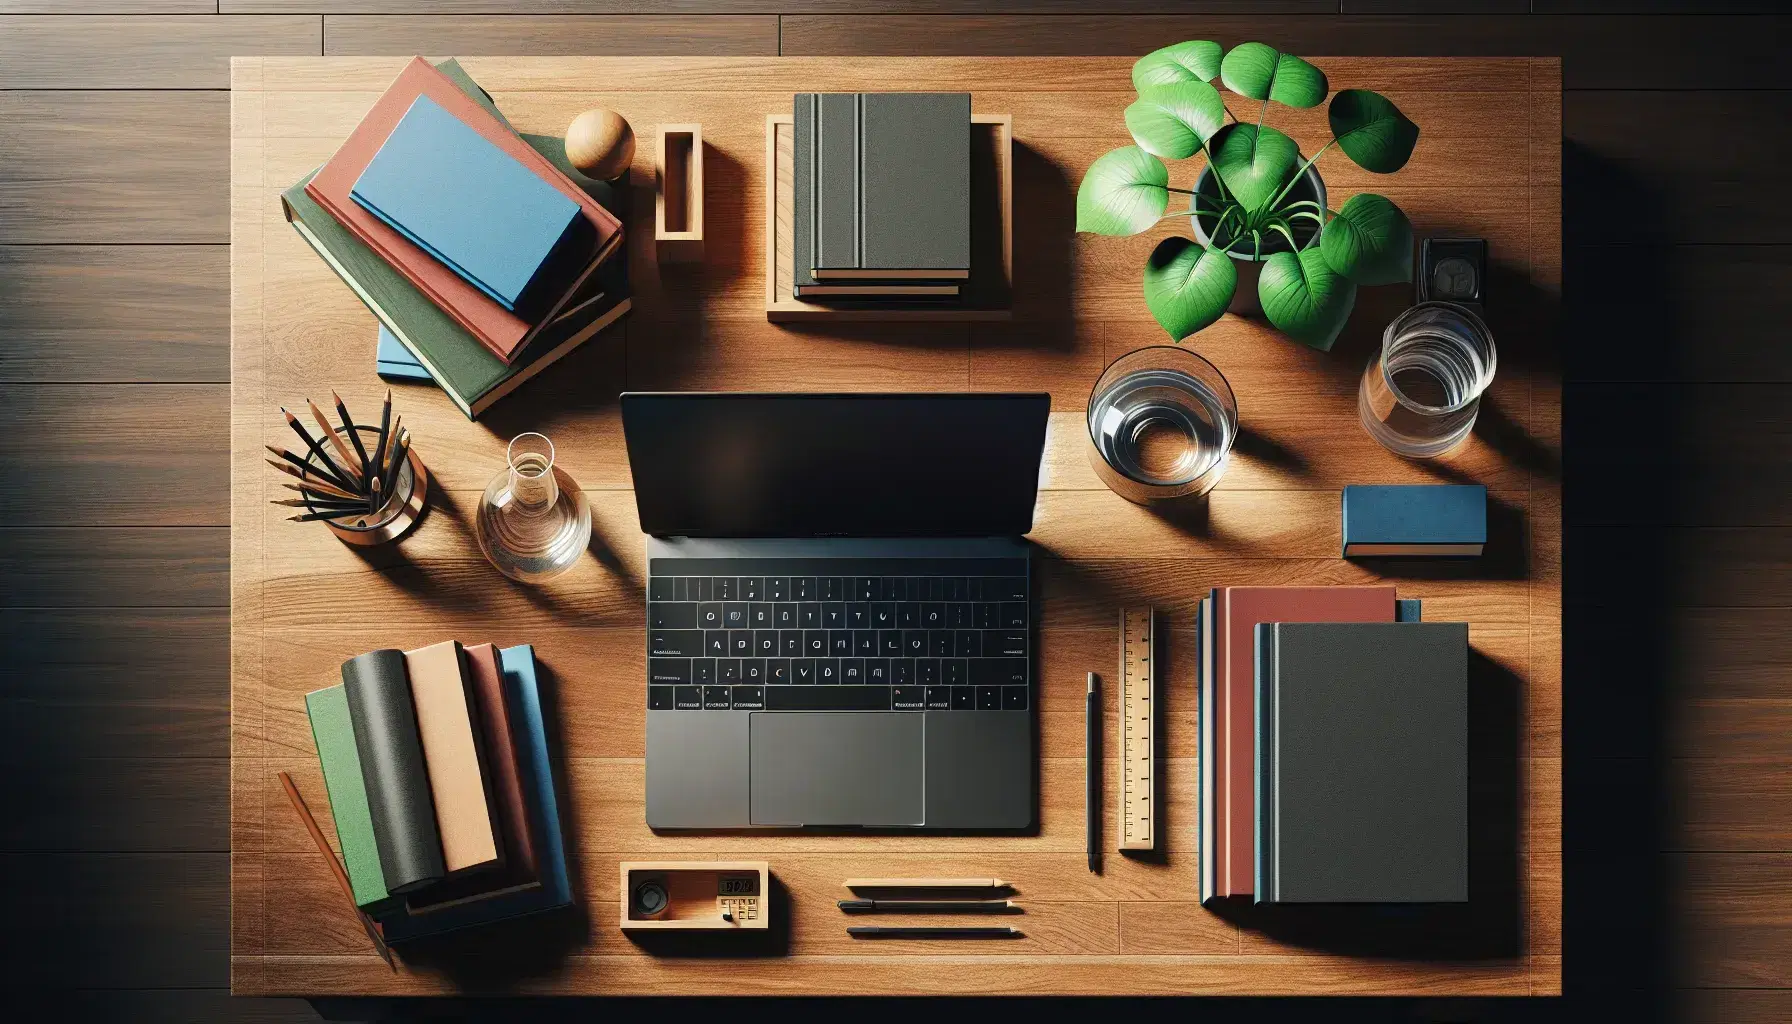 Organized wooden desk with a black laptop, stack of colorful hardcover books, half-filled glass beaker, green potted plant, scattered geometric wooden blocks, and a silver pen on a blank notebook.